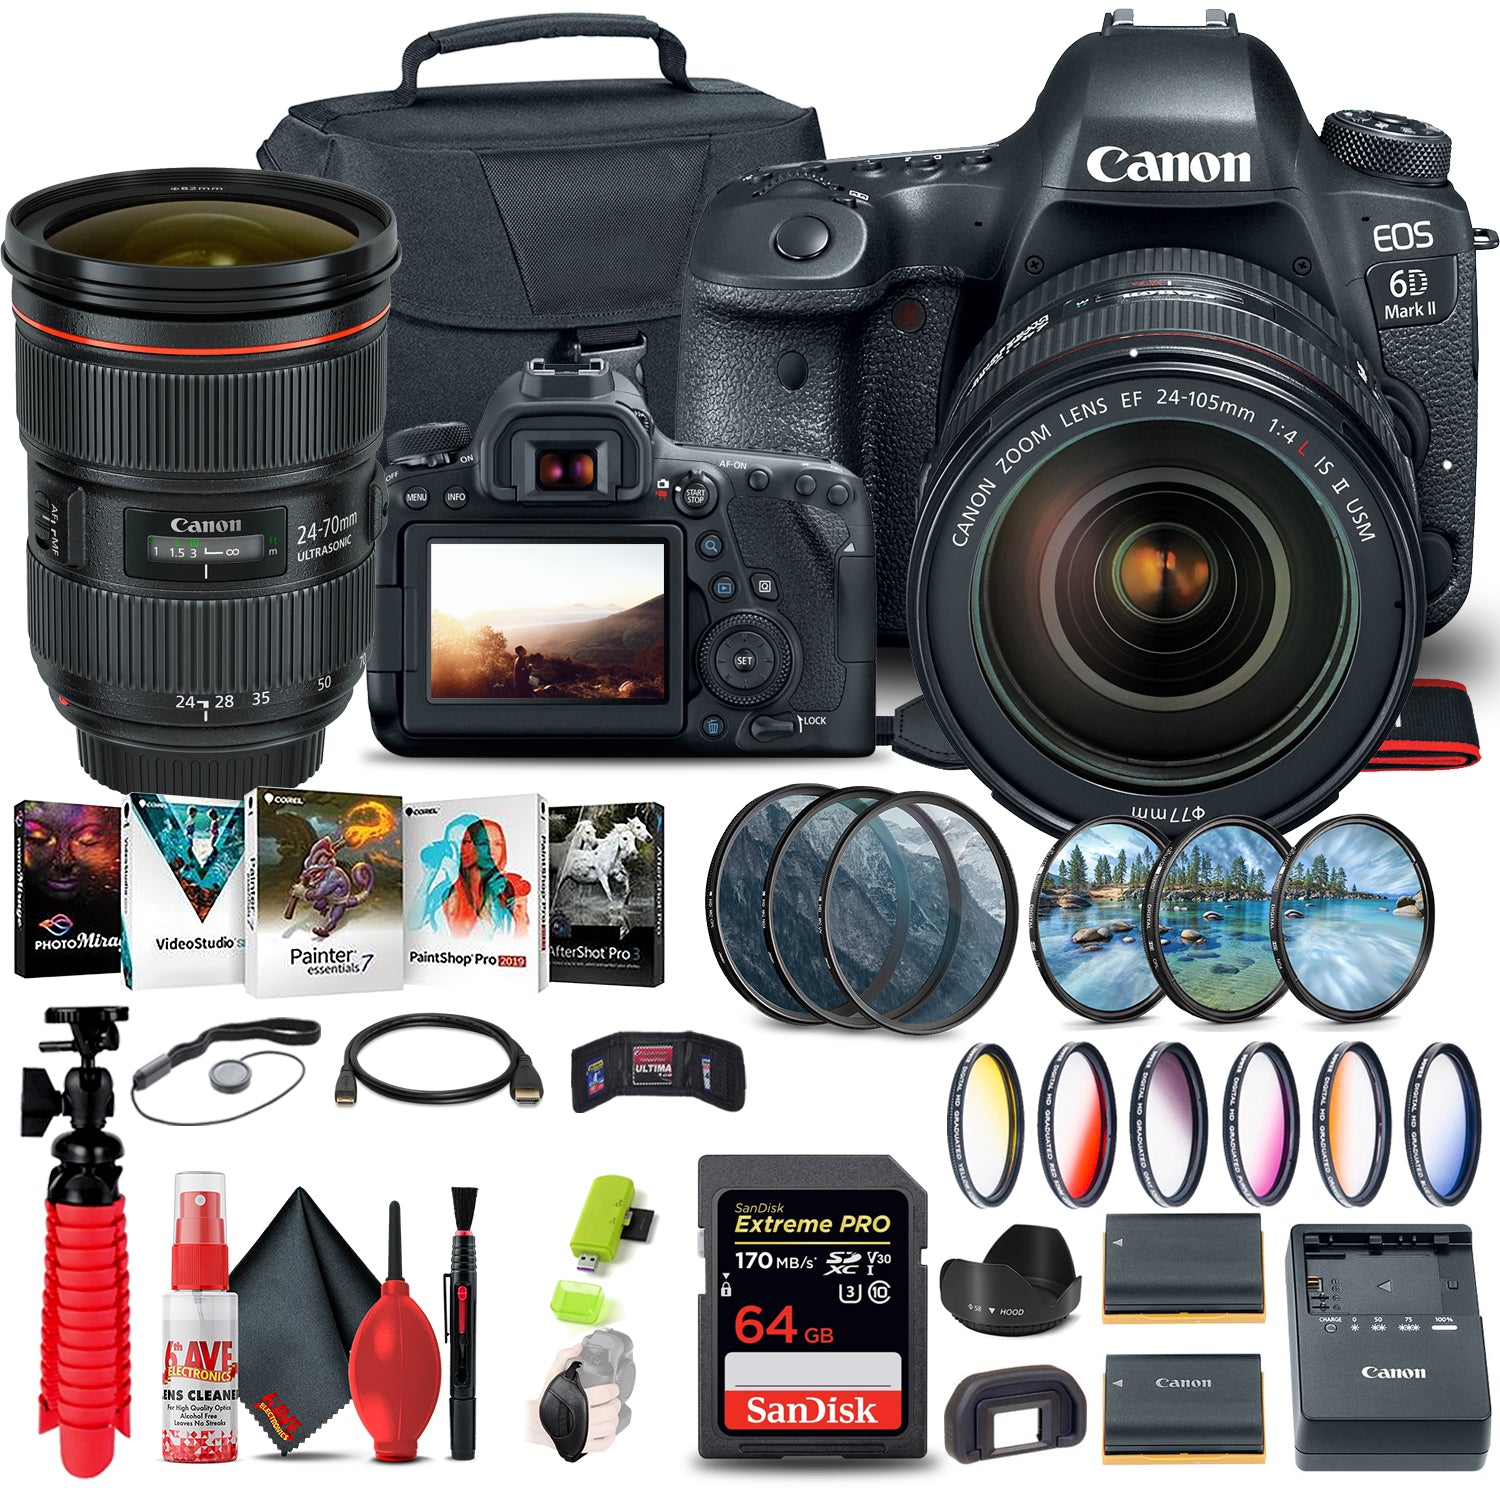 Canon EOS 6D Mark II Camera with 24-105mm f/4L II Lens (1897C009) Extra Battery Bundle